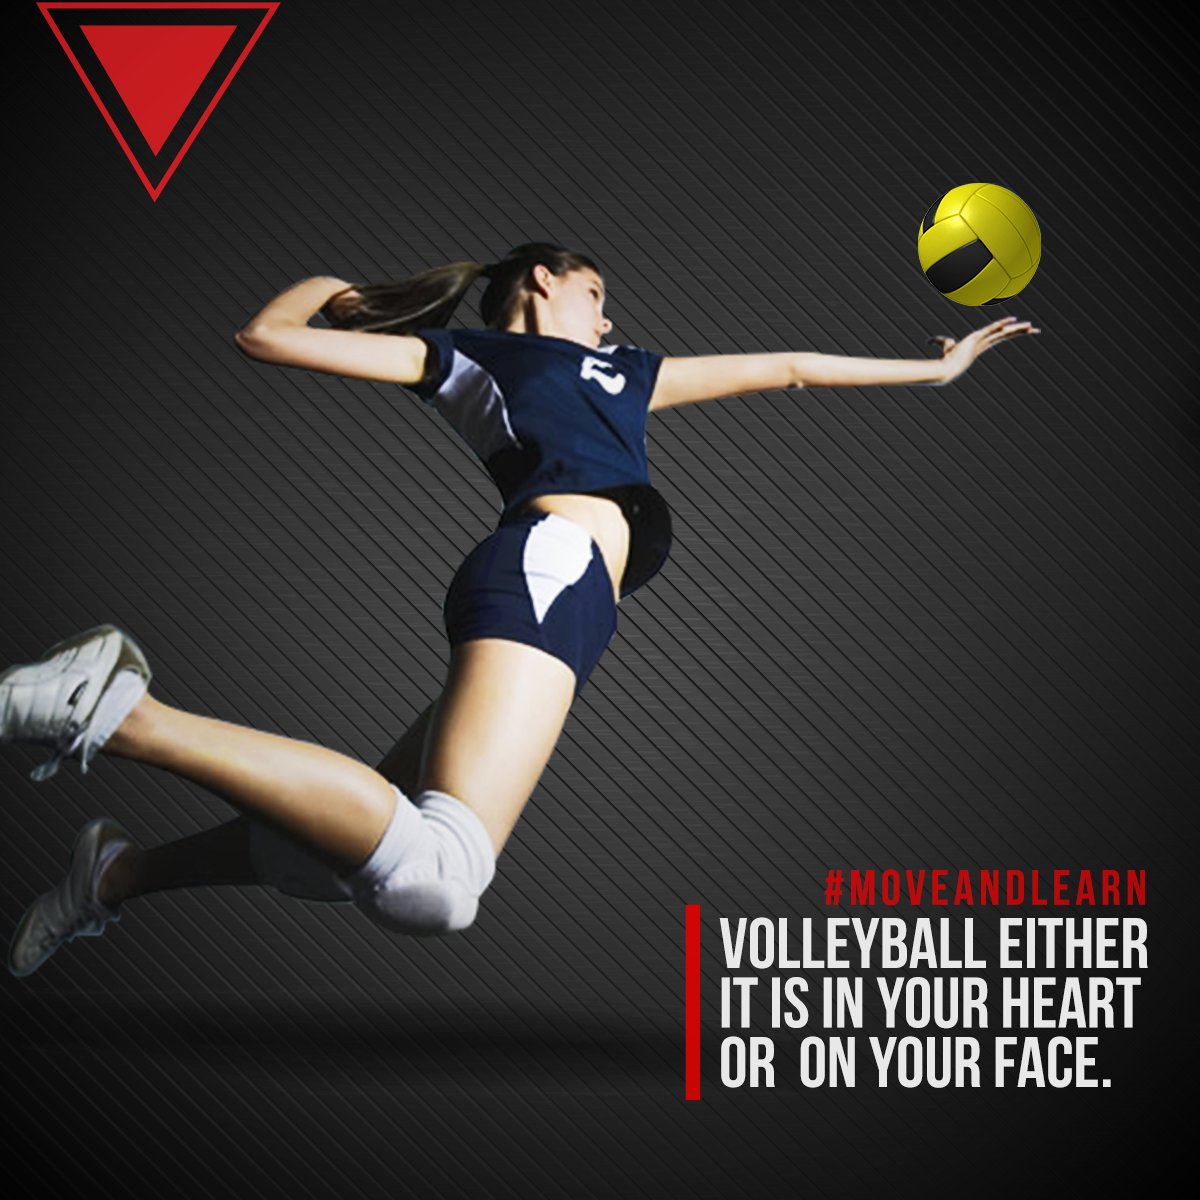 When it is about volleyball, there are no second thoughts.
#volleyball #alwaysinheart 
ow.ly/XlGS3